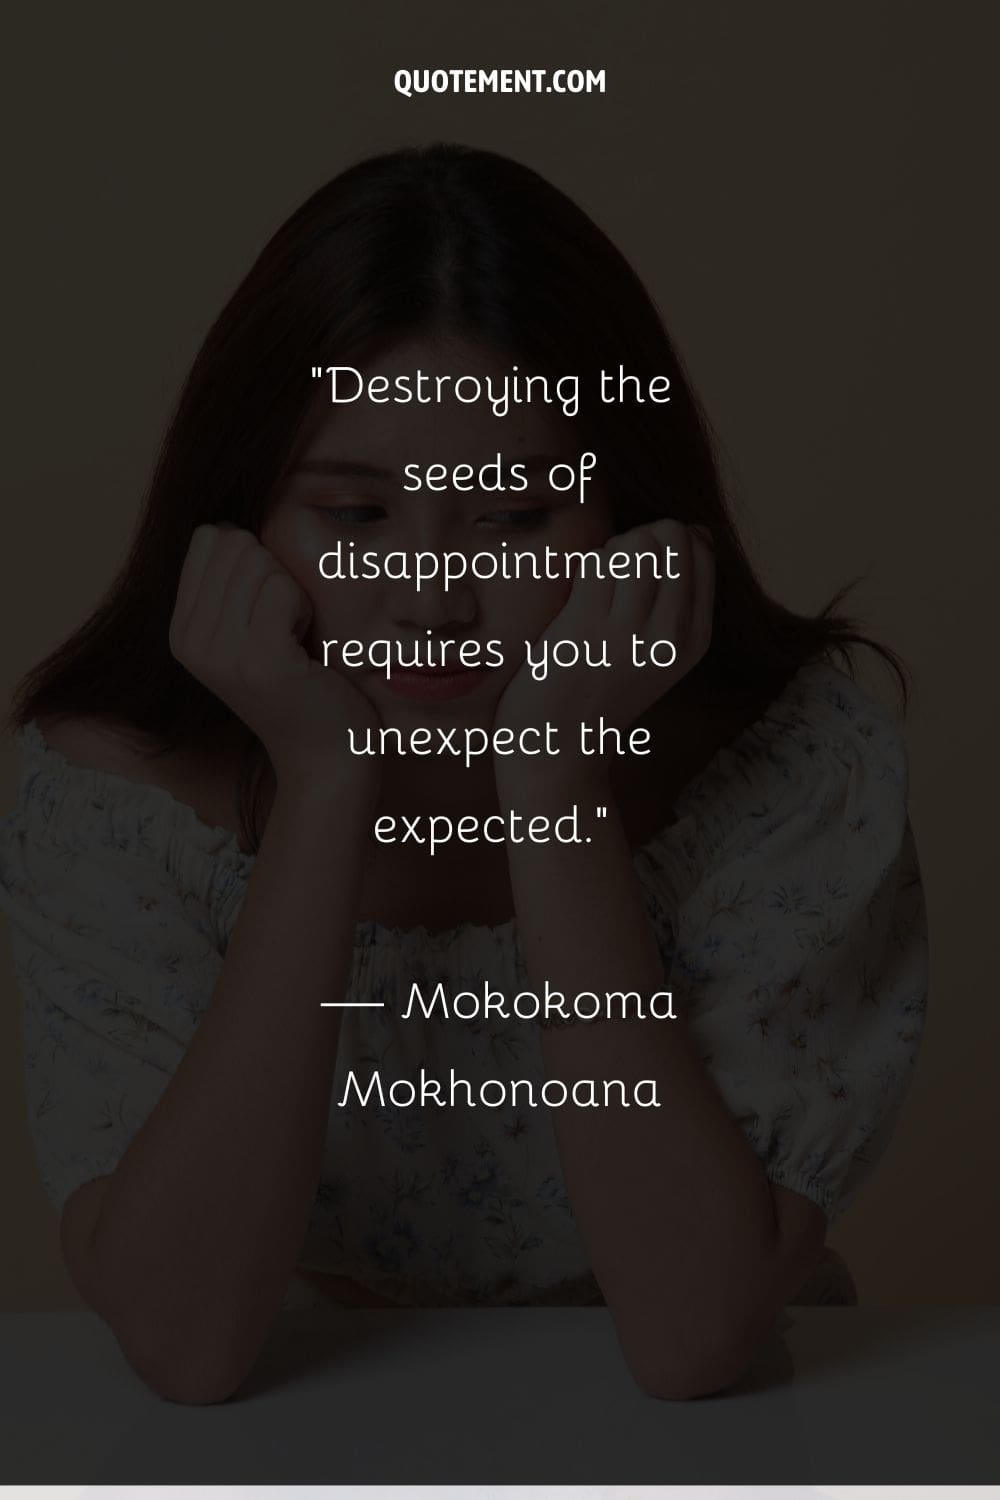 Destroying the seeds of disappointment requires you to unexpect the expected